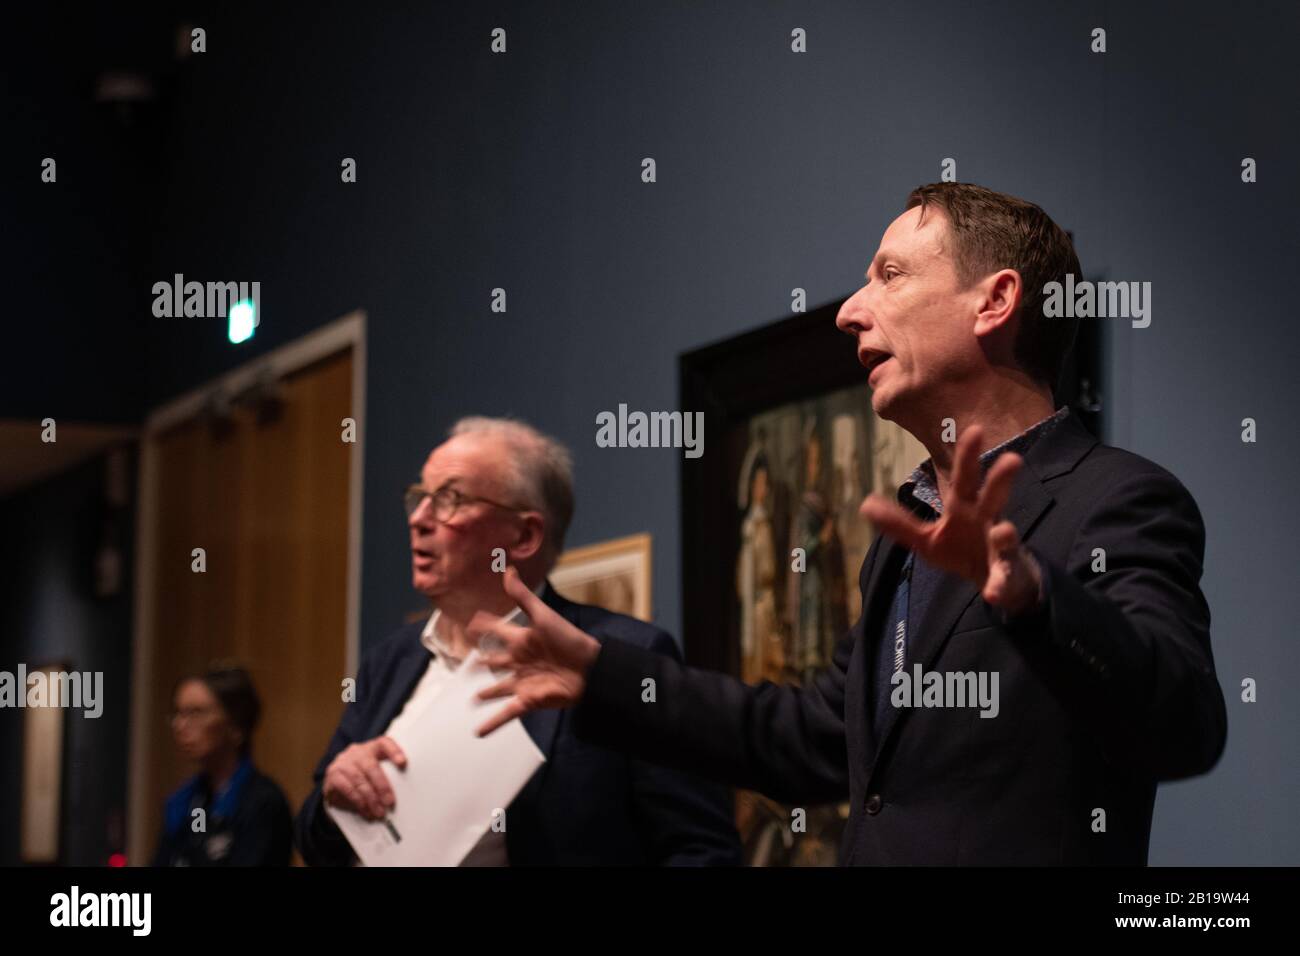 Oxford, UK. Monday 24th February 2020. Dr Xa Sturgis (director of the Asmolean) at the launch of the Young Rembrandt exhibition at The Ashmolean Museum, Oxford. Credit: Andrew Walmsley/Alamy Live News Stock Photo